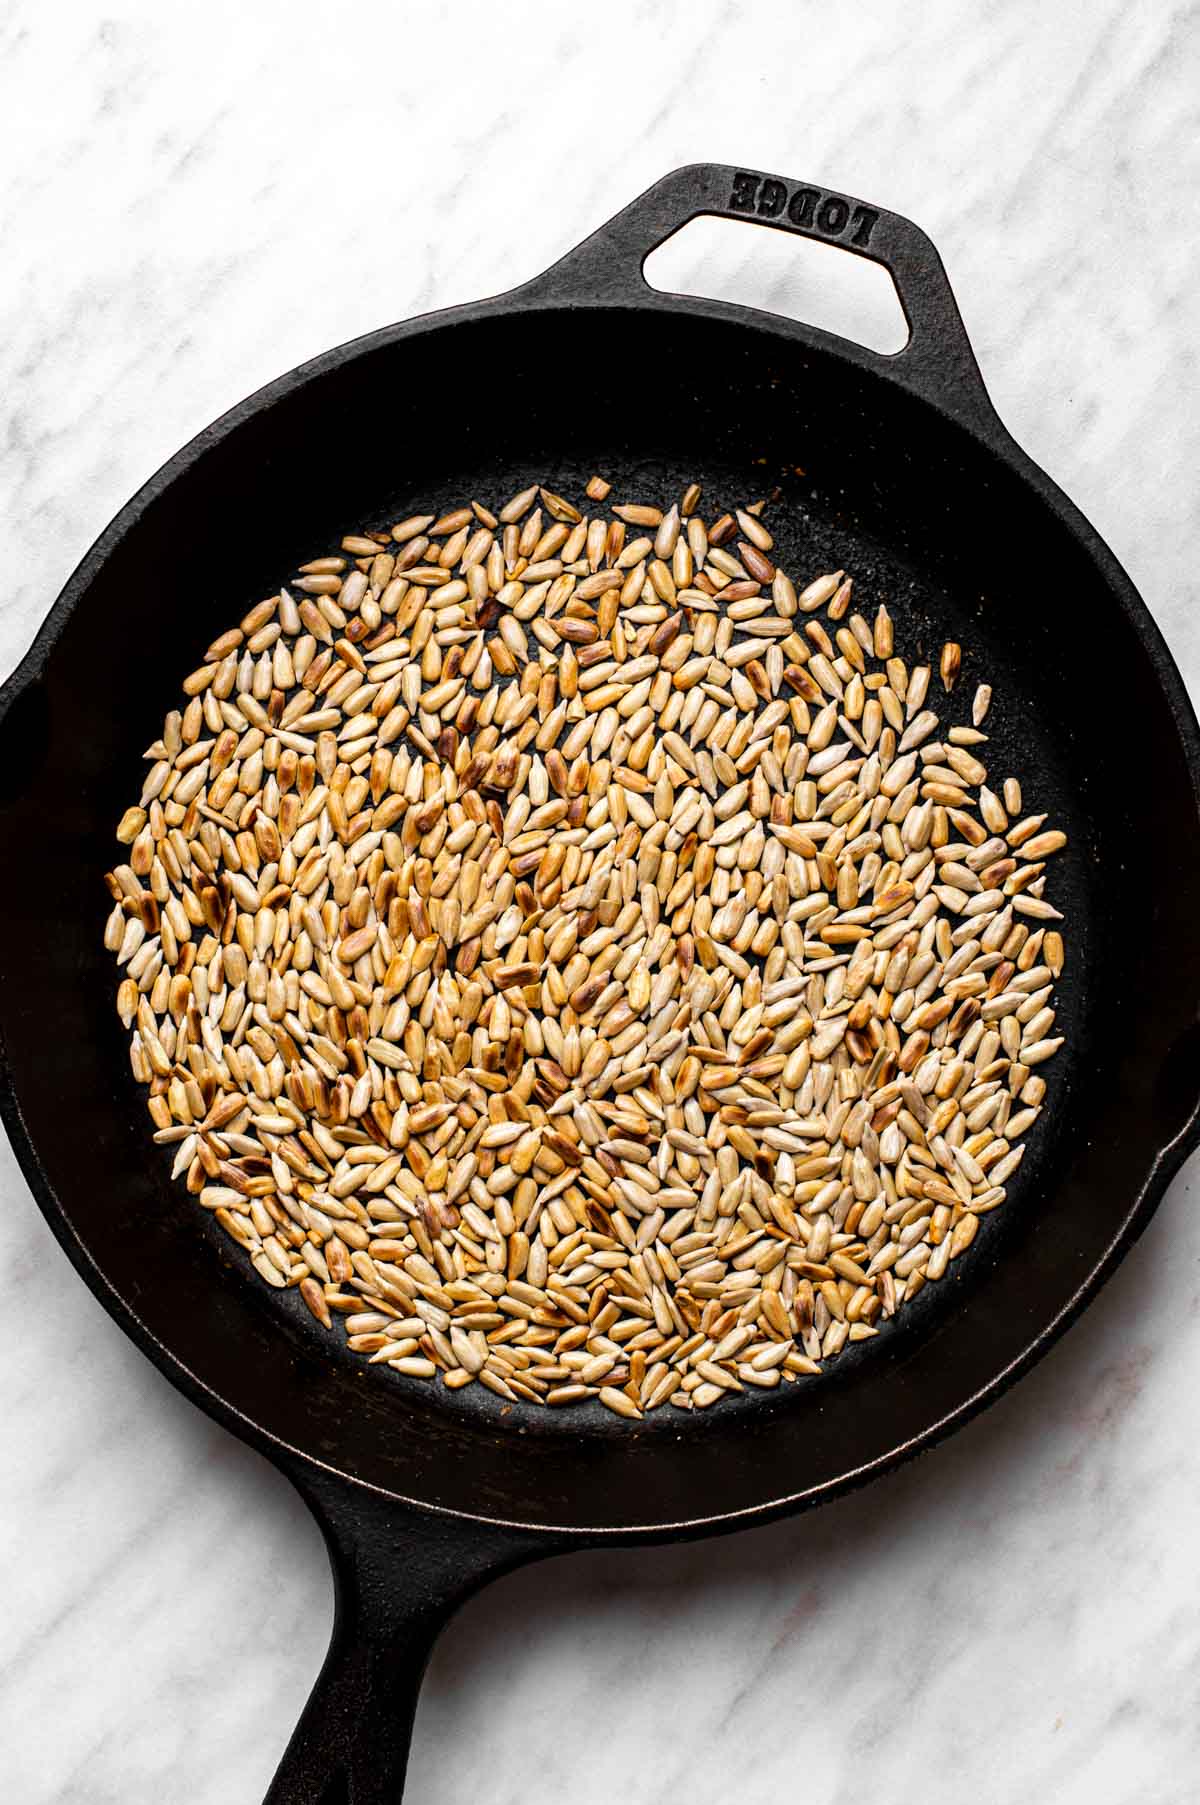 Toasting sunflower seeds in a cast-iron skillet.